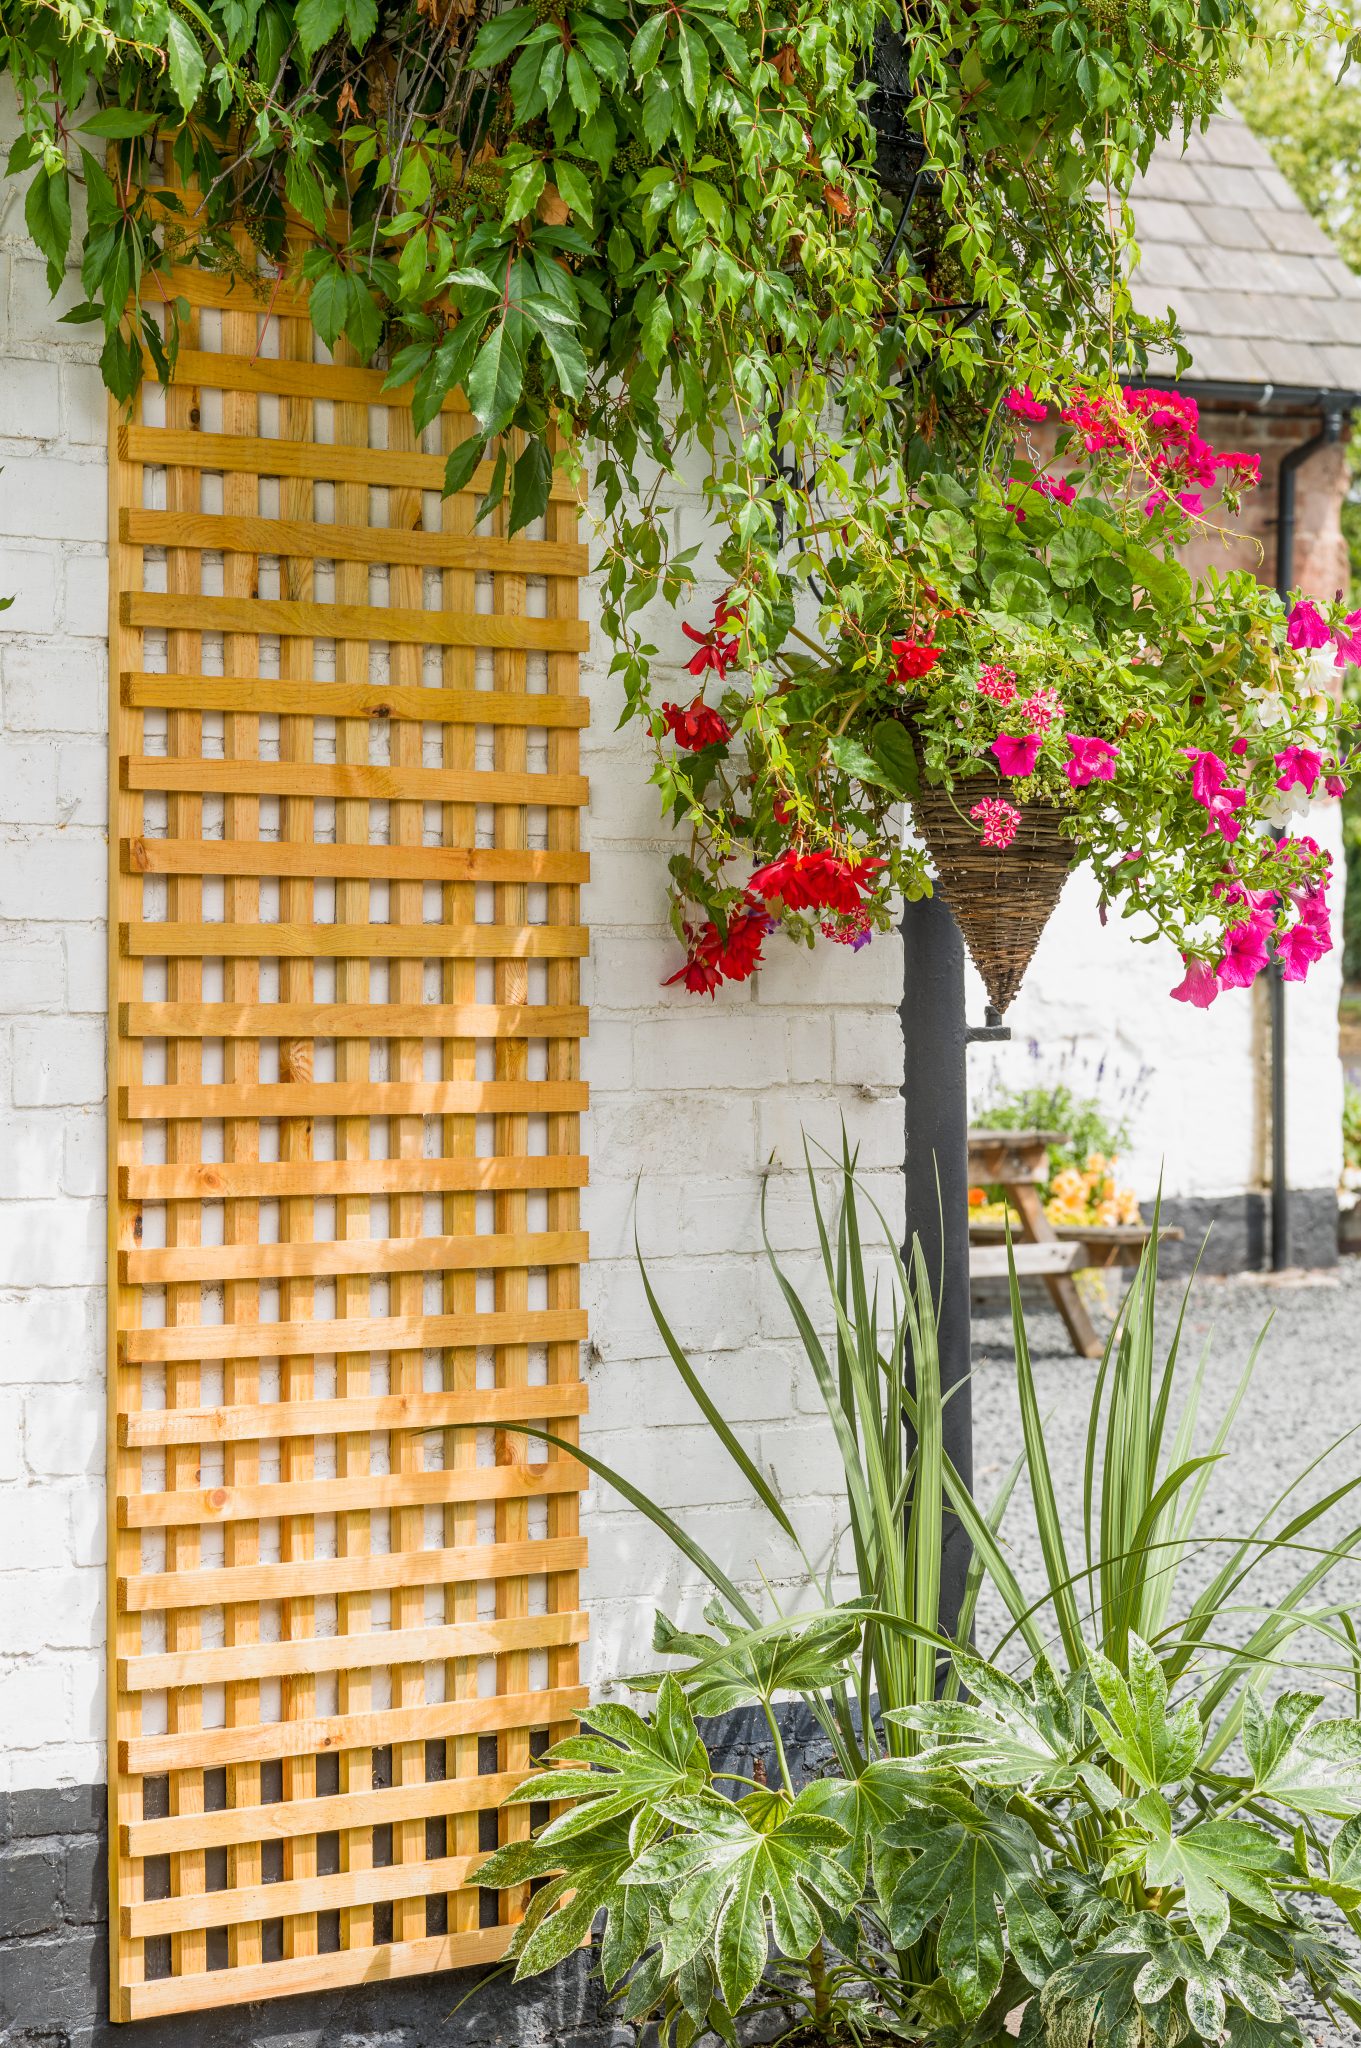 A fine mesh square style, heavy duty trellis that is great as a fence top, privacy screen or supporting climbing plants. The Badminton Trellis is manufactured from fine sawn timber that provides a smooth and exceptional finish and is available pressure-treated golden brown for longevity in use.